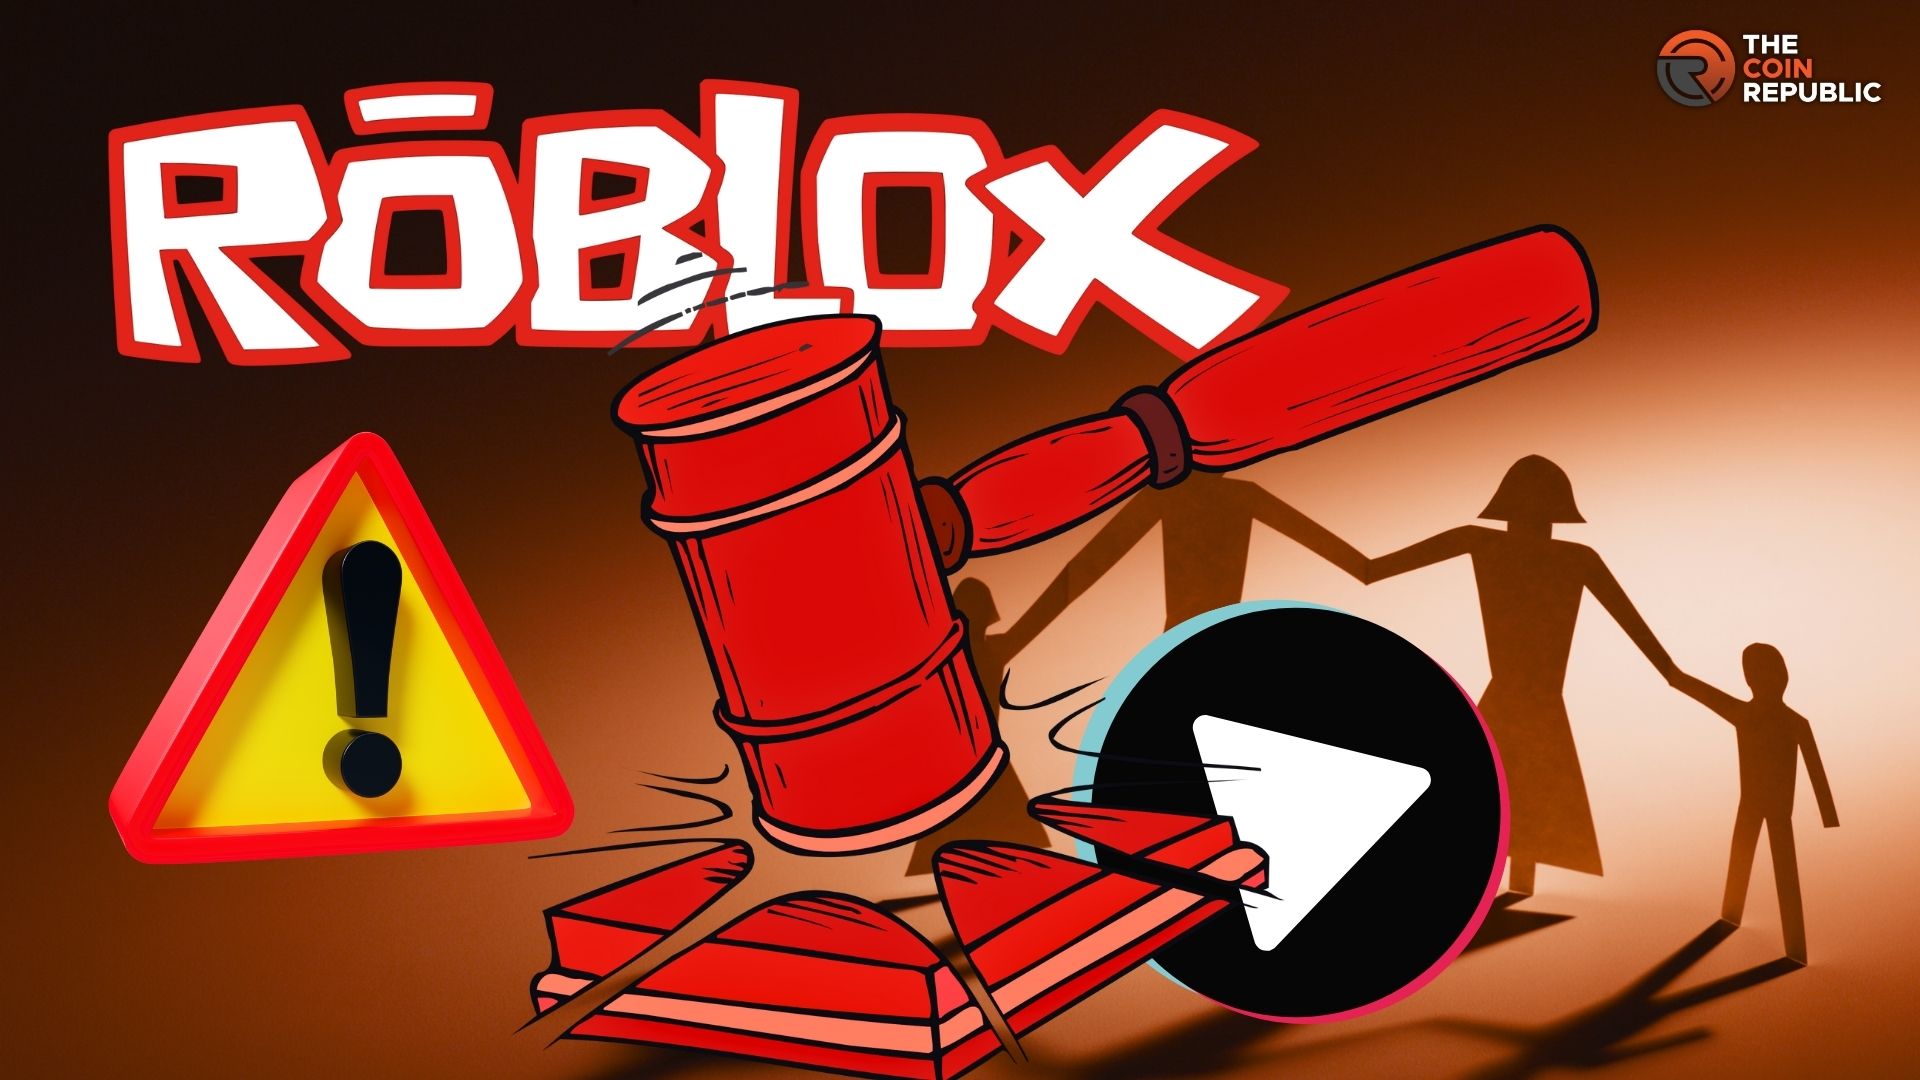 Alleged Exposure to Explicit Content Leads Roblox Into a Lawsuit